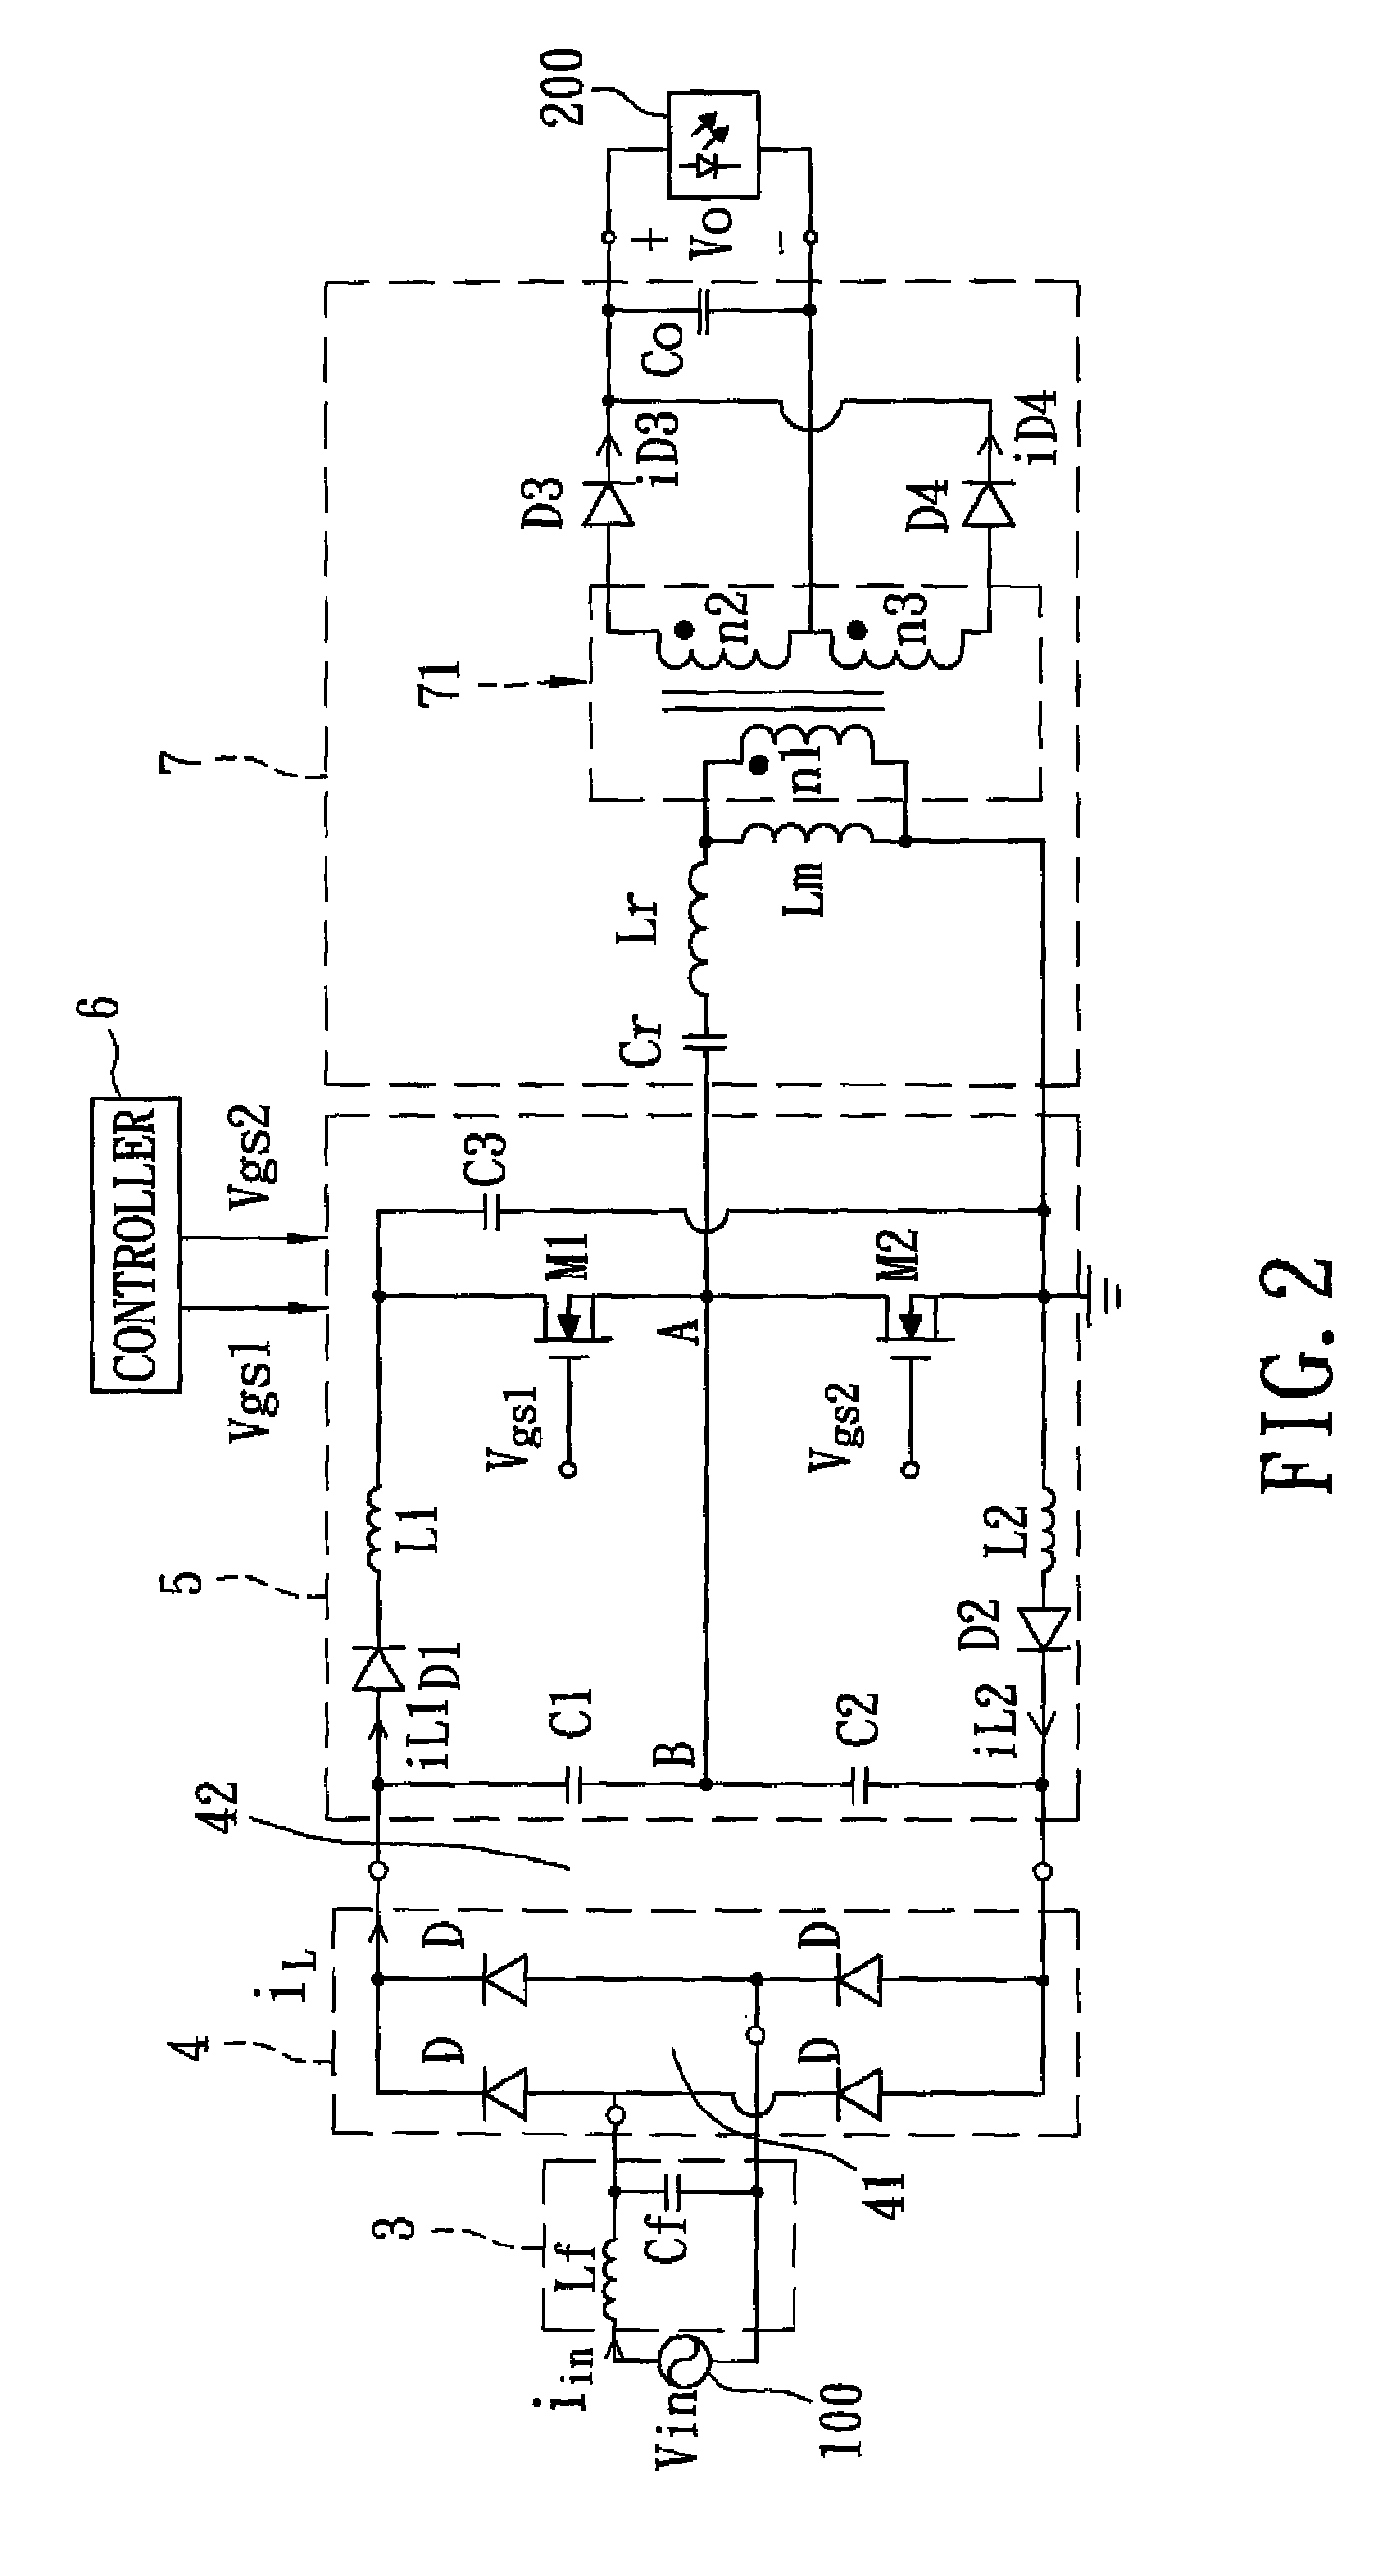 AC-to-DC power converting device